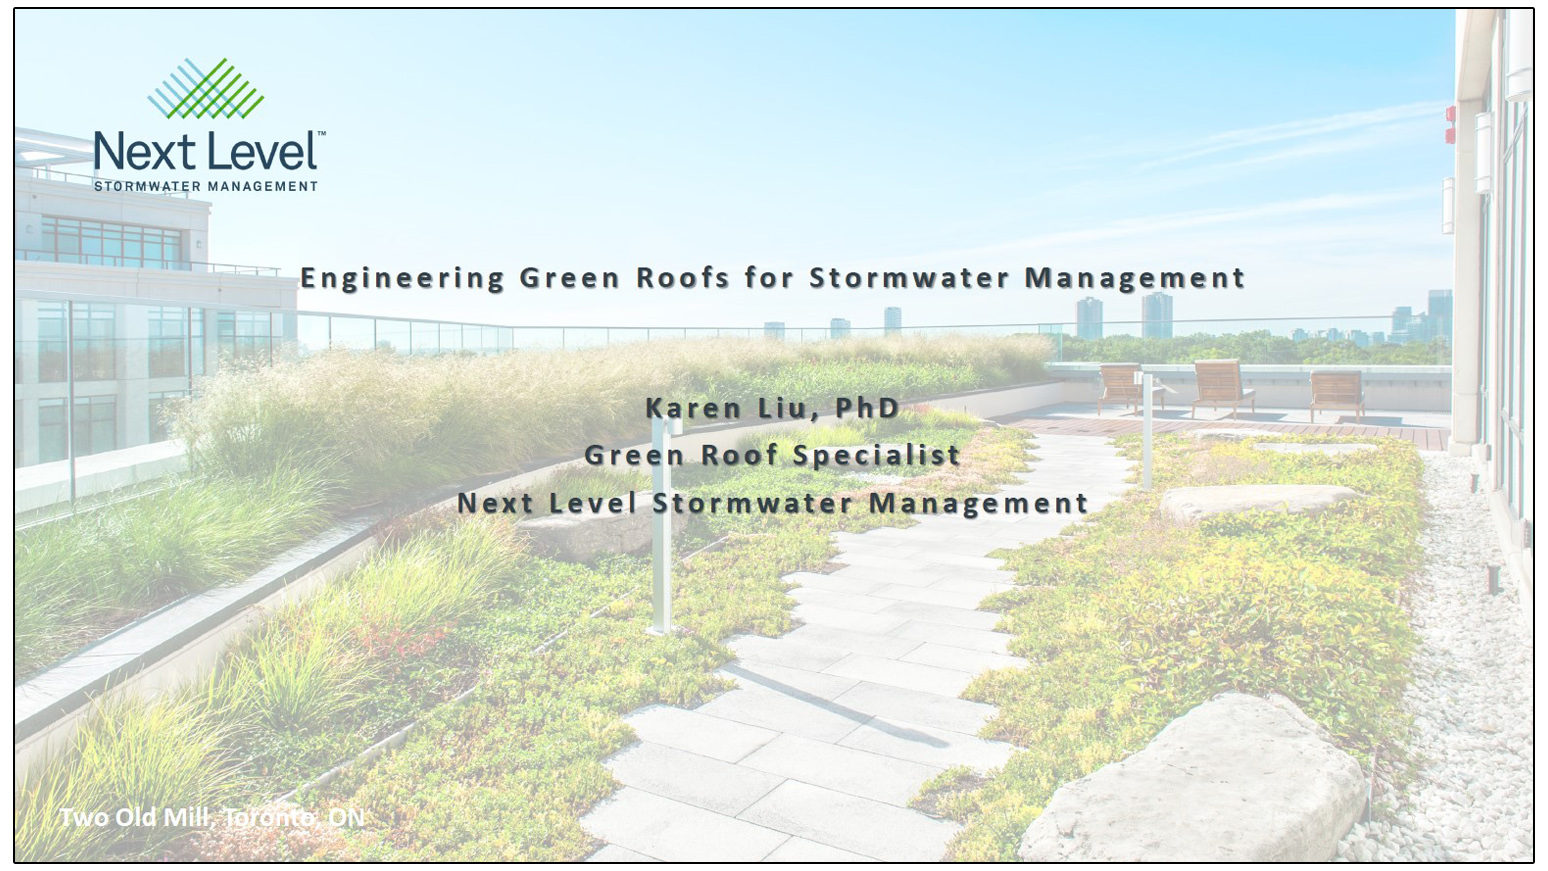 Engineering Green Roofs for Stormwater Management - Presented by Karen Liu